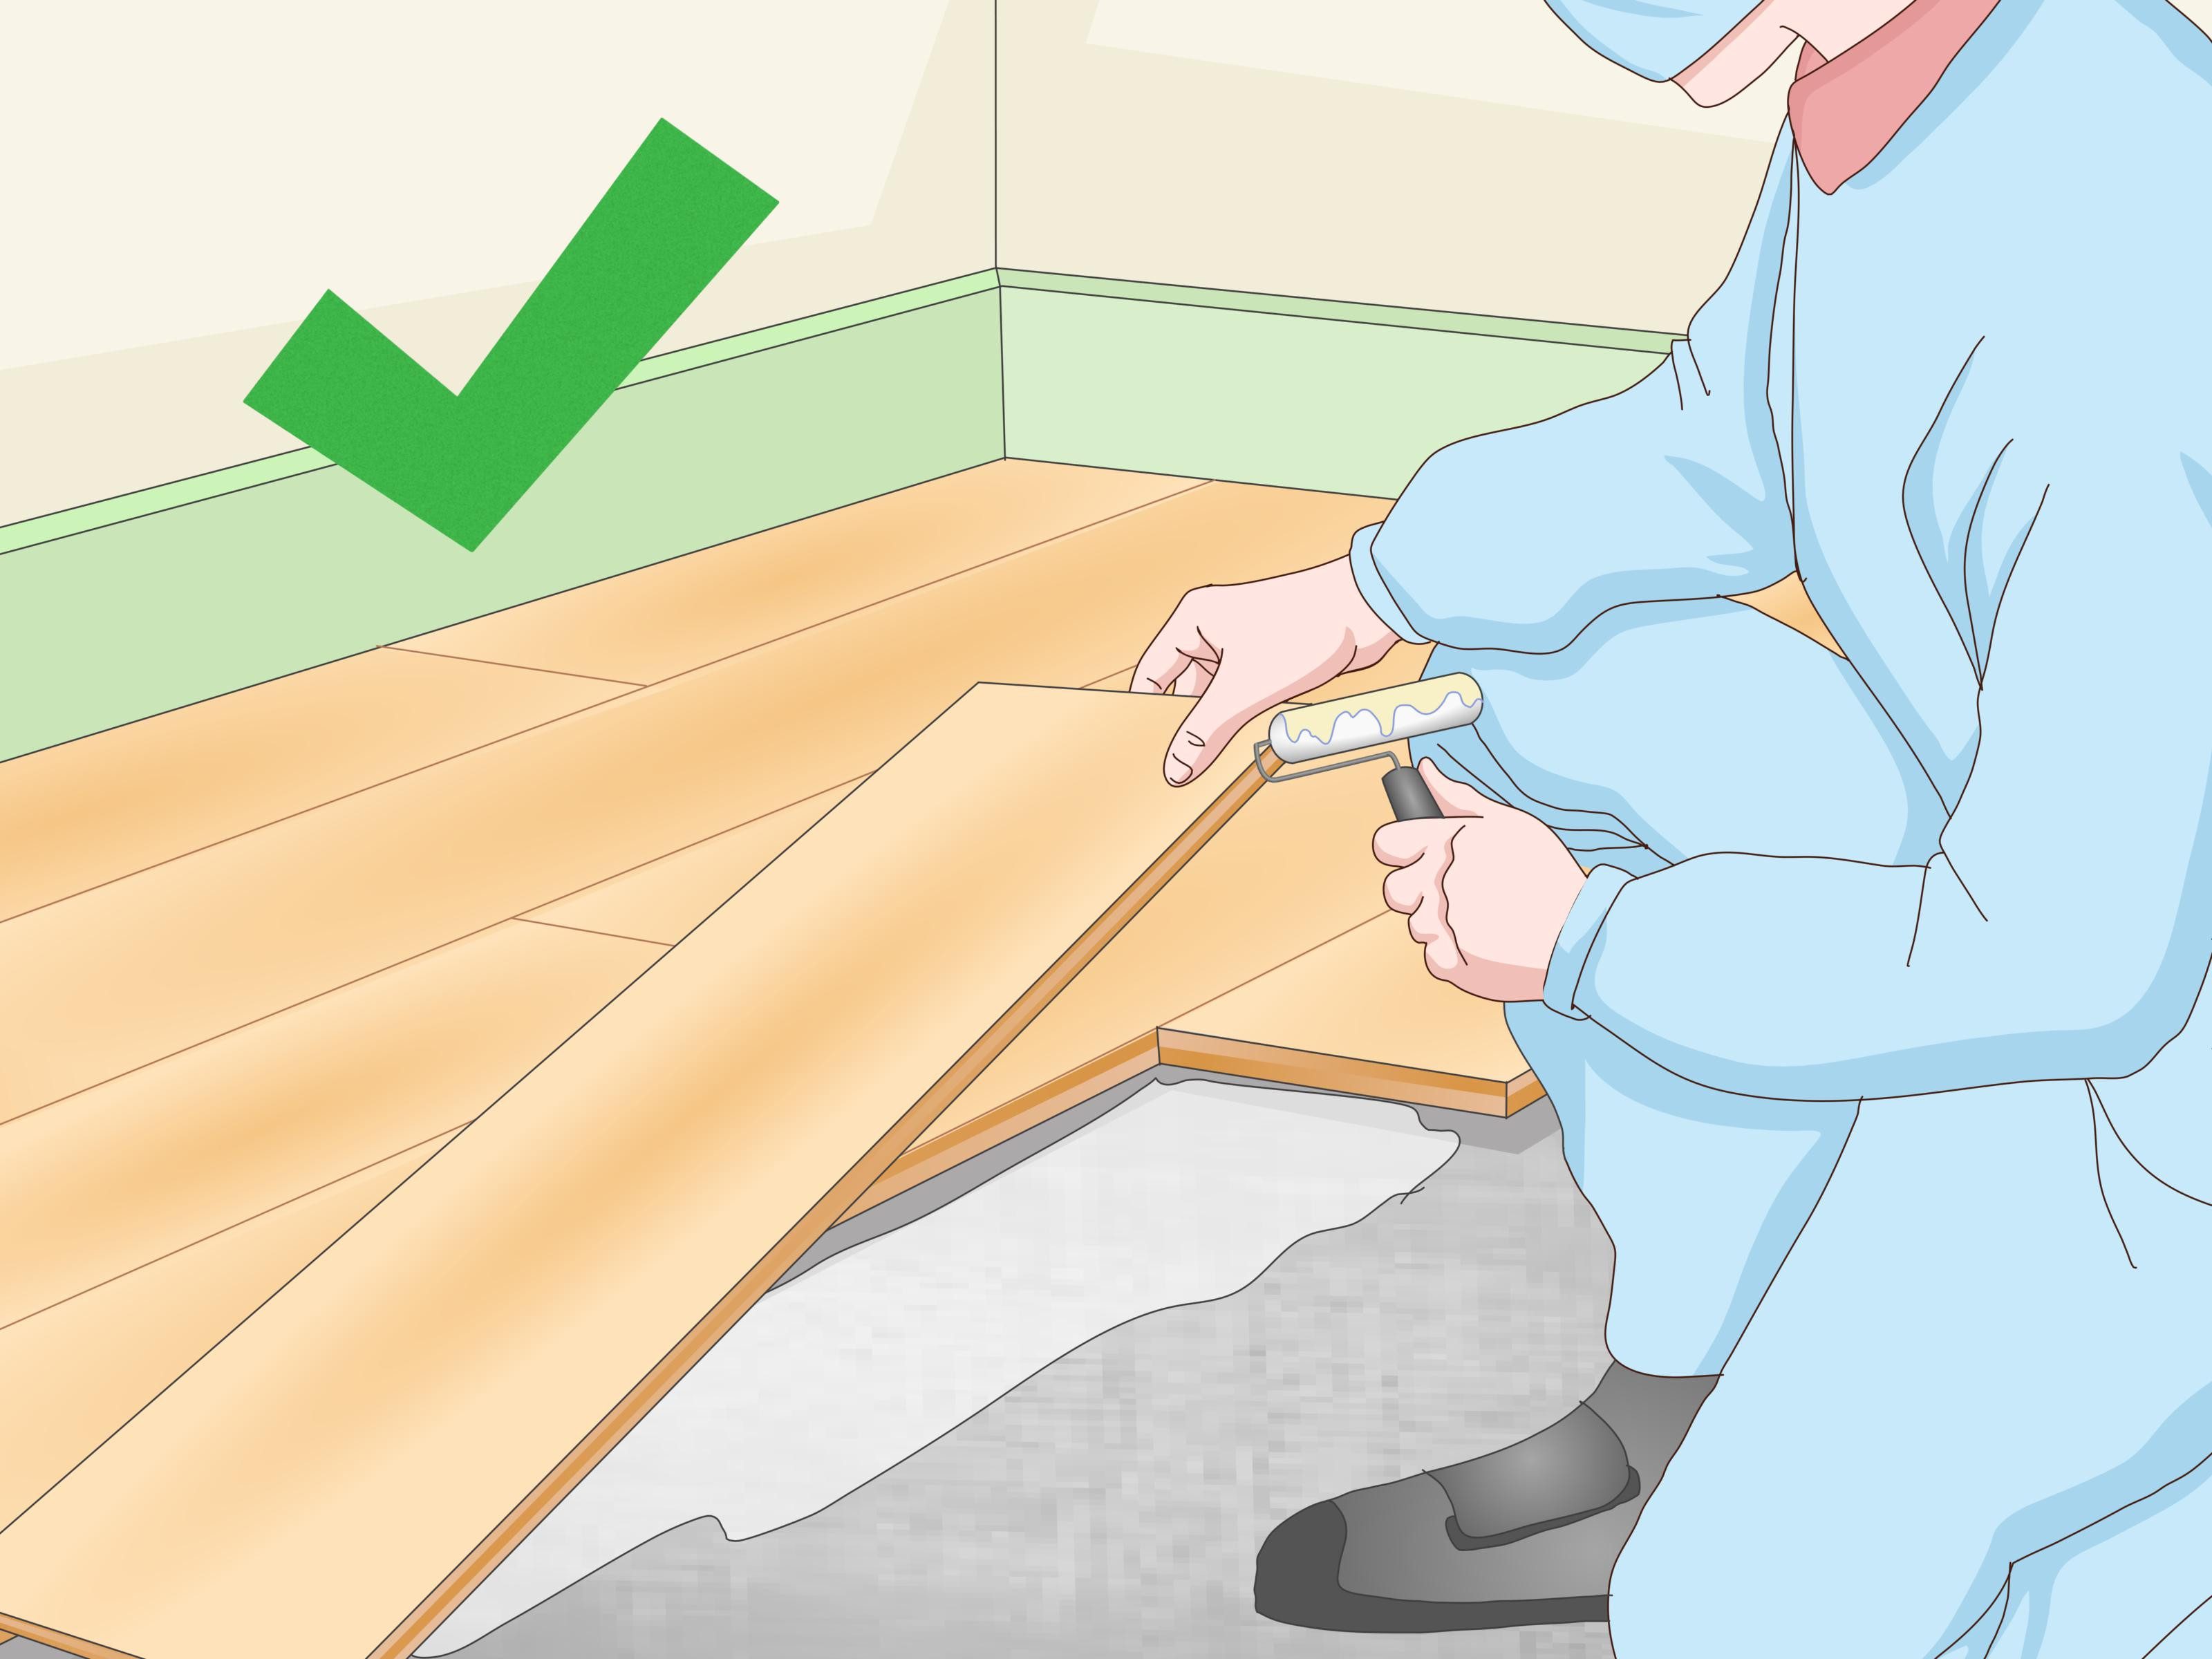 hardwood floor refinishing how long to dry of 3 ways to close gaps in laminate flooring wikihow with close gaps in laminate flooring step 13